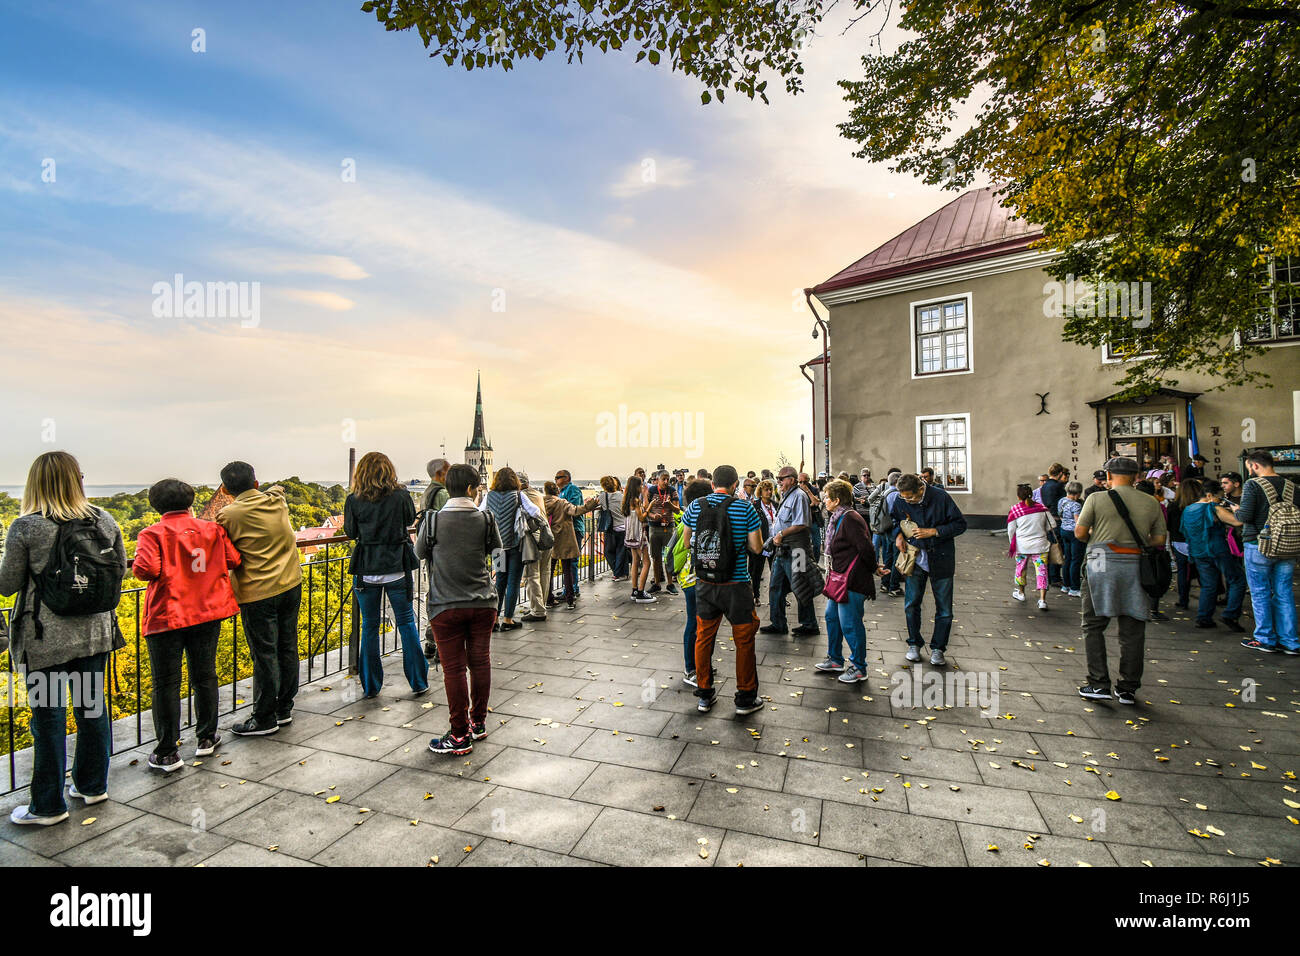 A crowd of tourists visit Toompea Hill Patkuli Overlook to enjoy a view of the Town Hall tower and ancient walled medieval city of Tallinn, Estonia Stock Photo